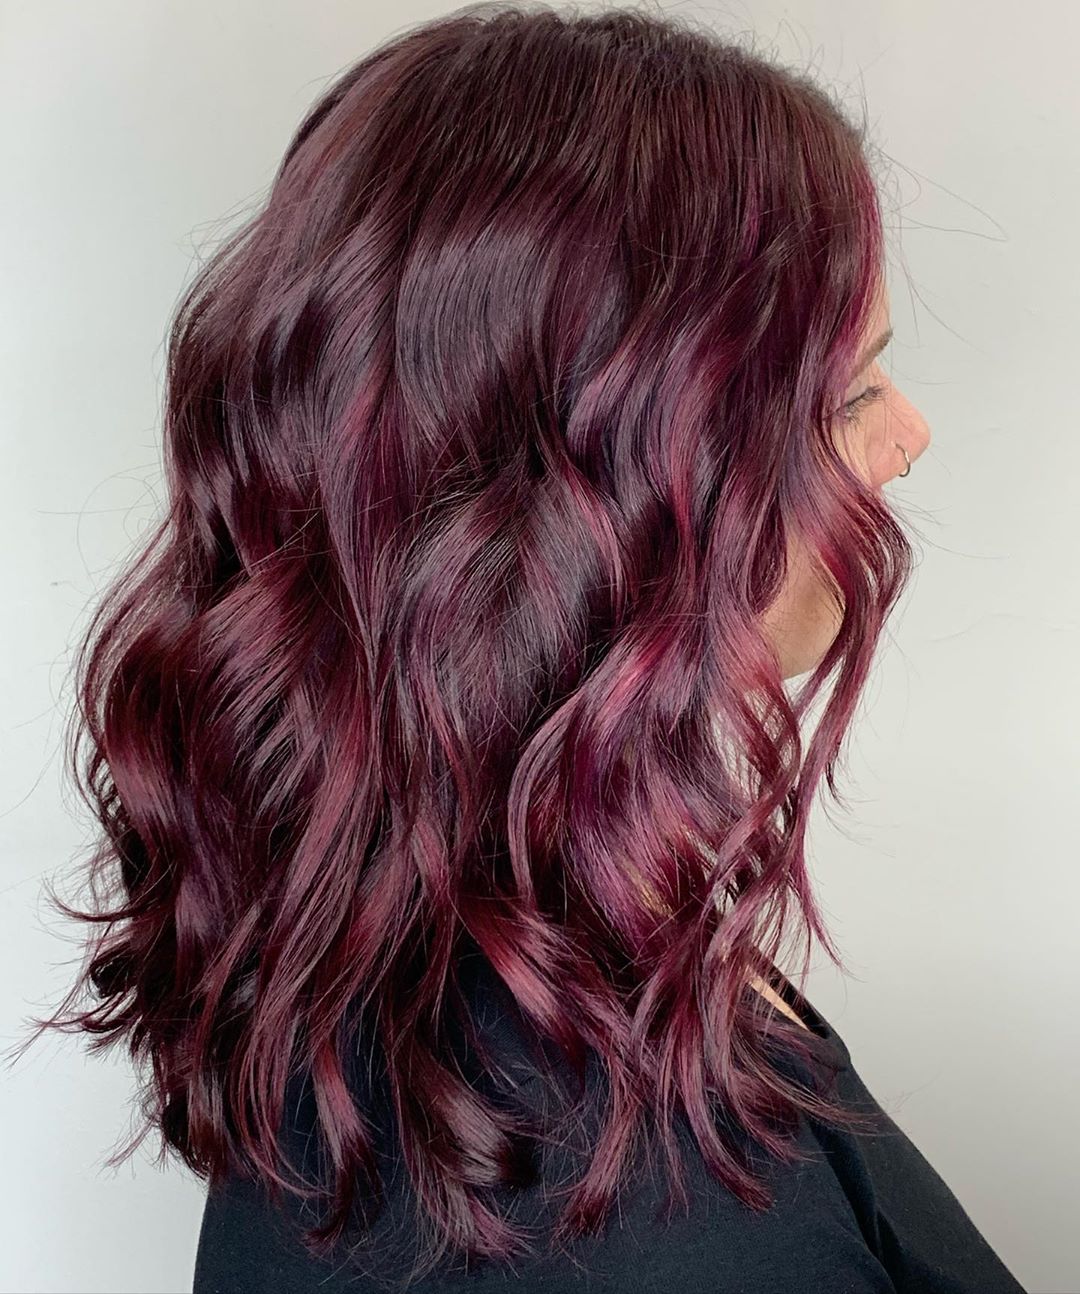 Does hair color that is actually crimson red exist? - Quora